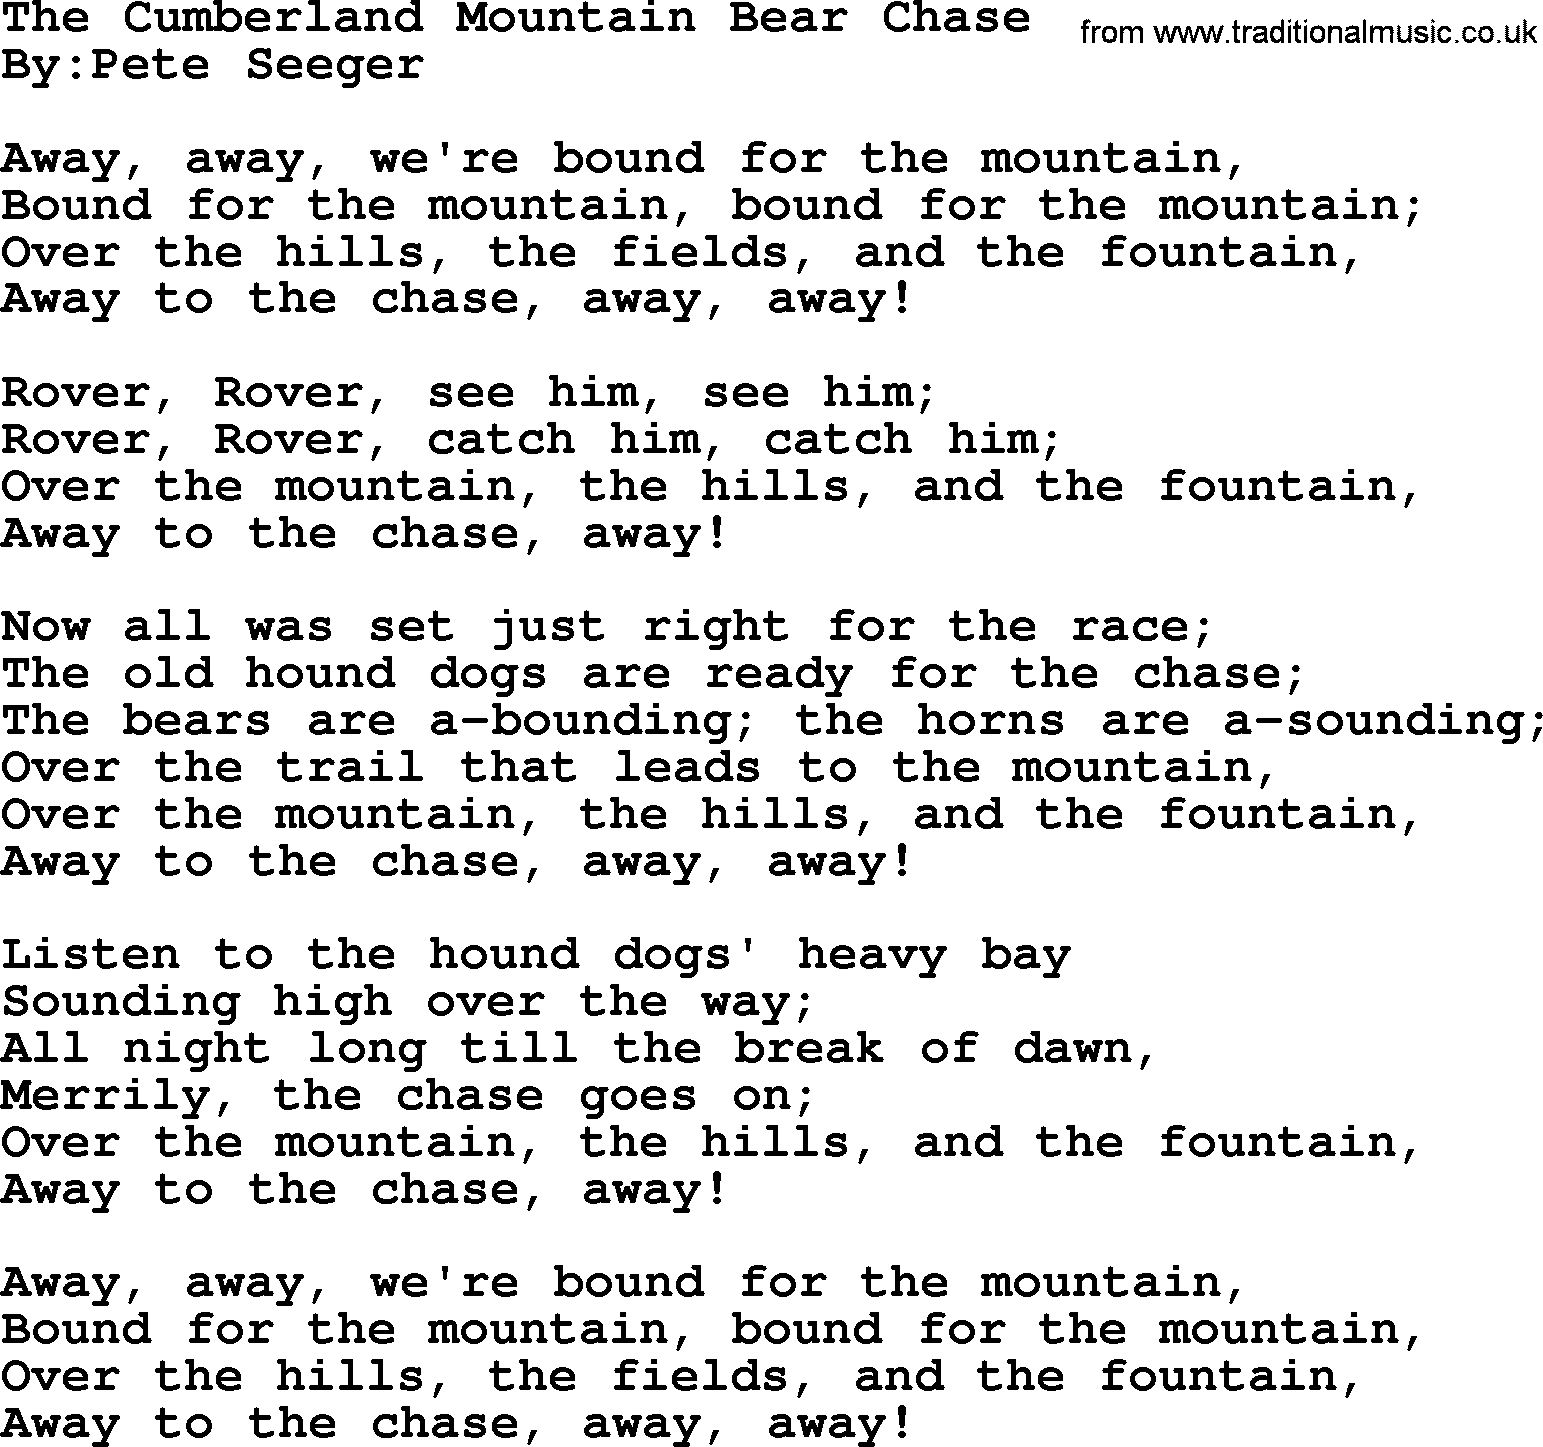 Political, Solidarity, Workers or Union song: The Cumberland Mountain Bear Chase, lyrics